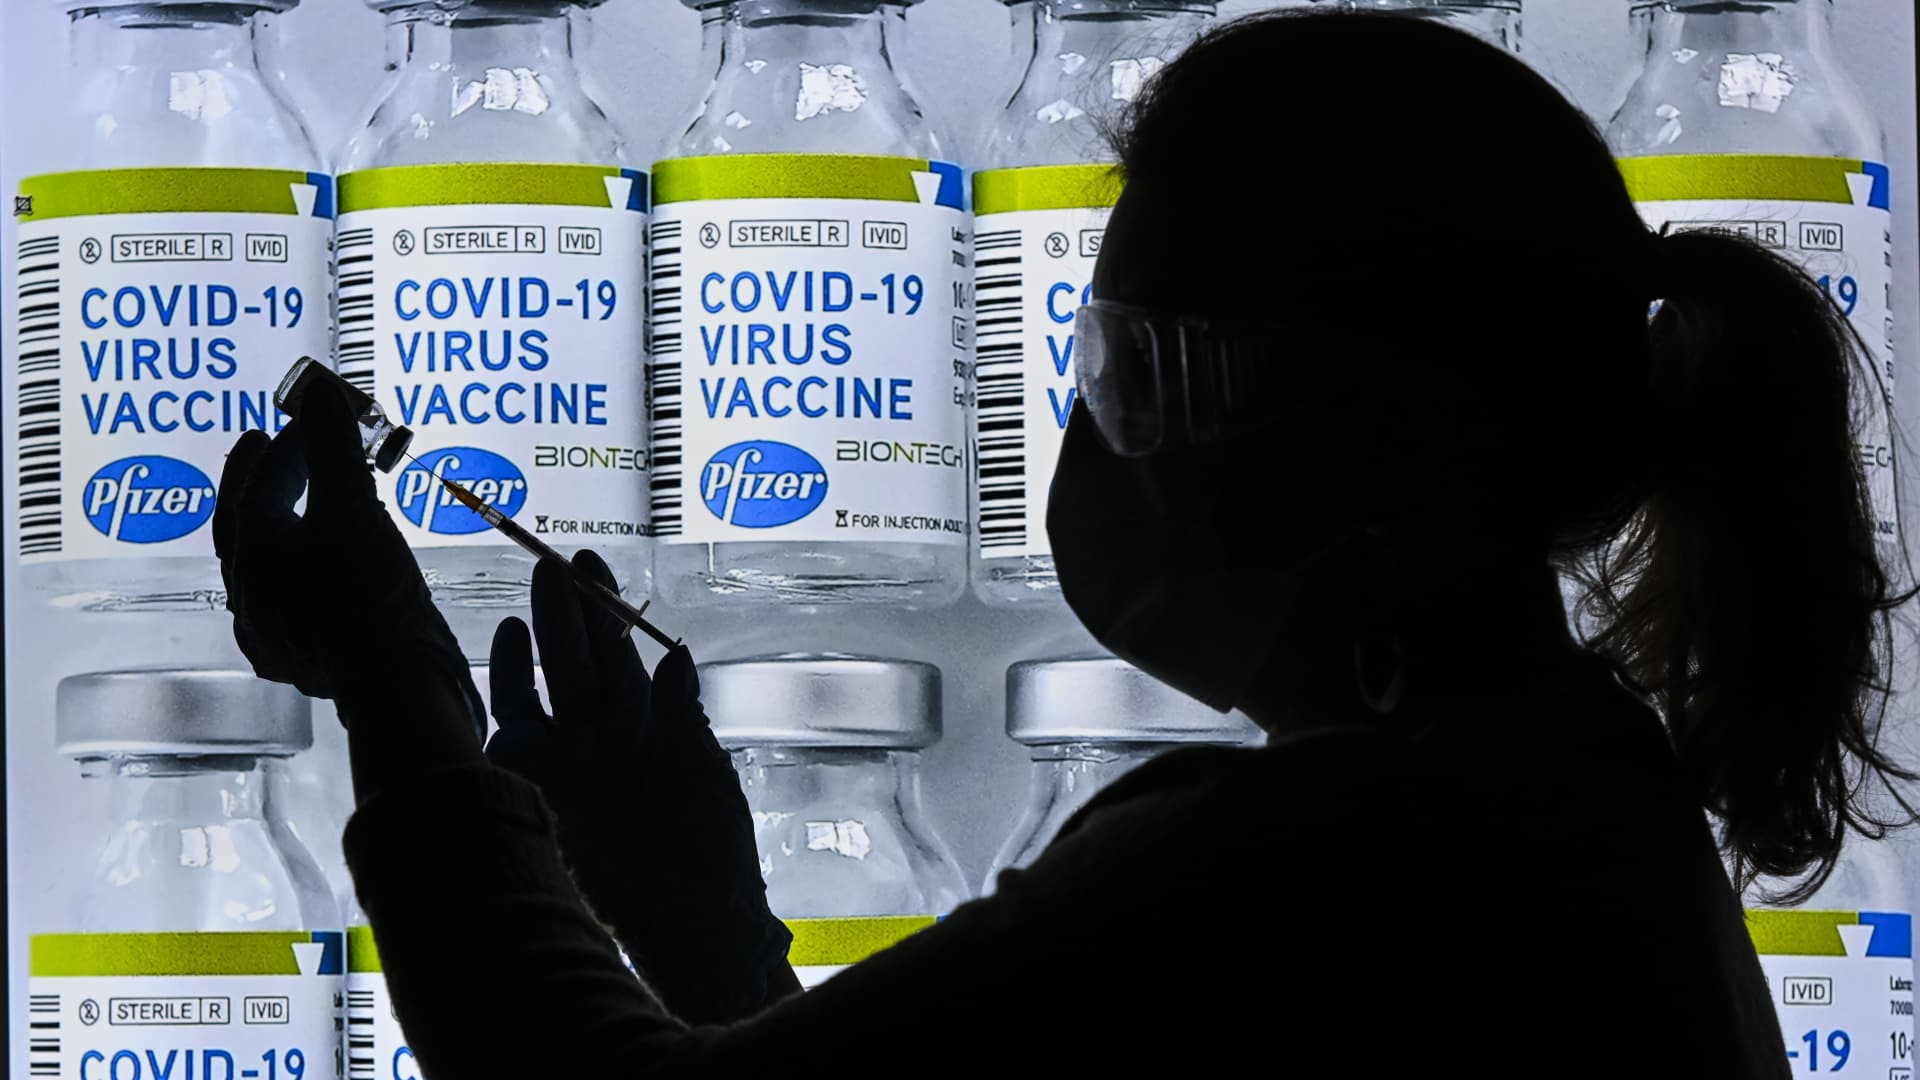 UK becomes the first to approve Pfizer-BioNTech Covid vaccine, rollout due next week